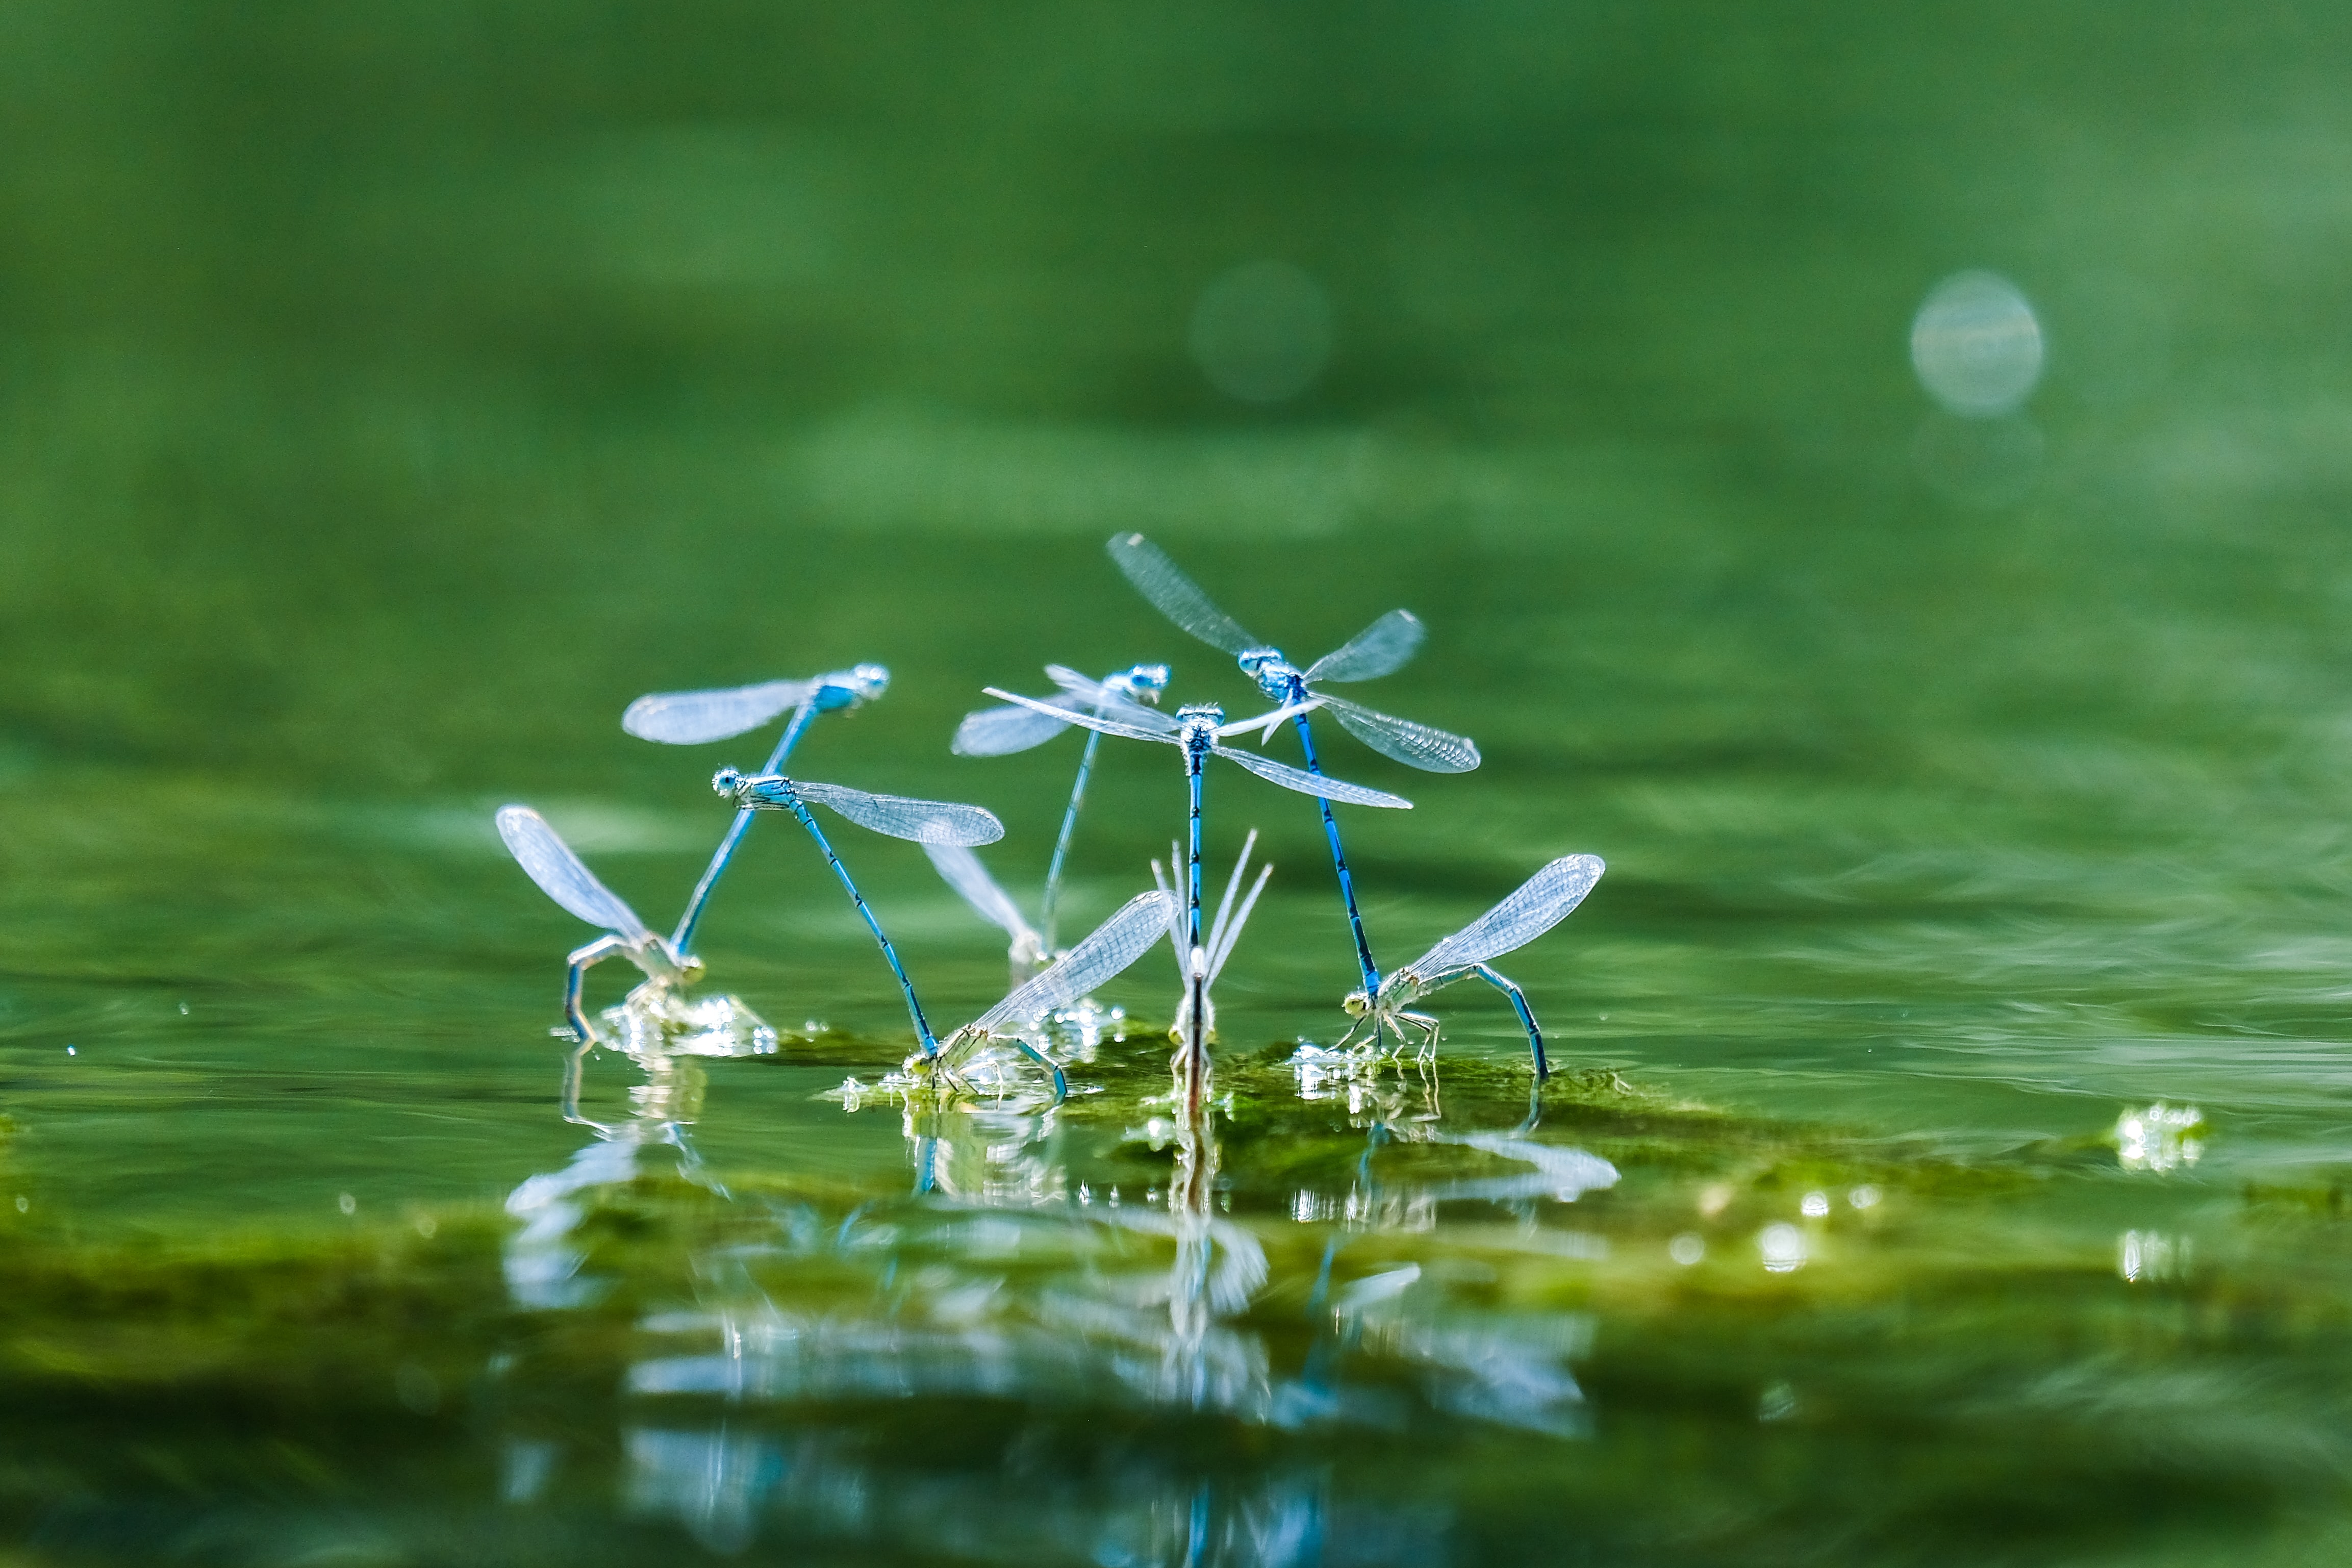 dragonflies gathered over water